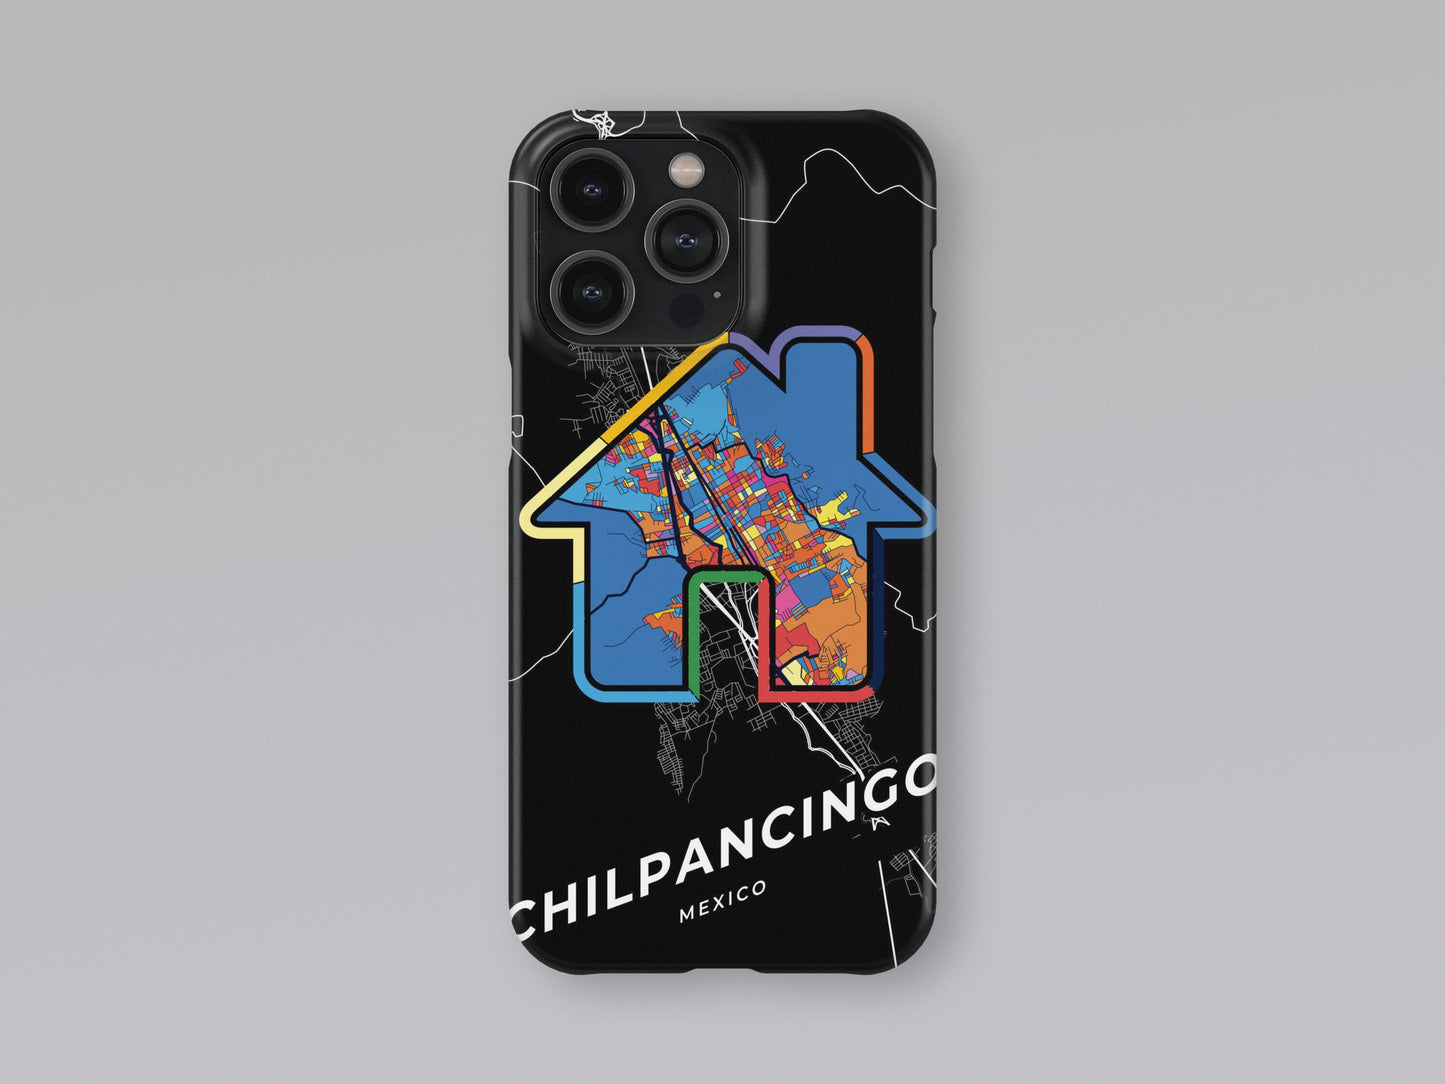 Chilpancingo Mexico slim phone case with colorful icon. Birthday, wedding or housewarming gift. Couple match cases. 3